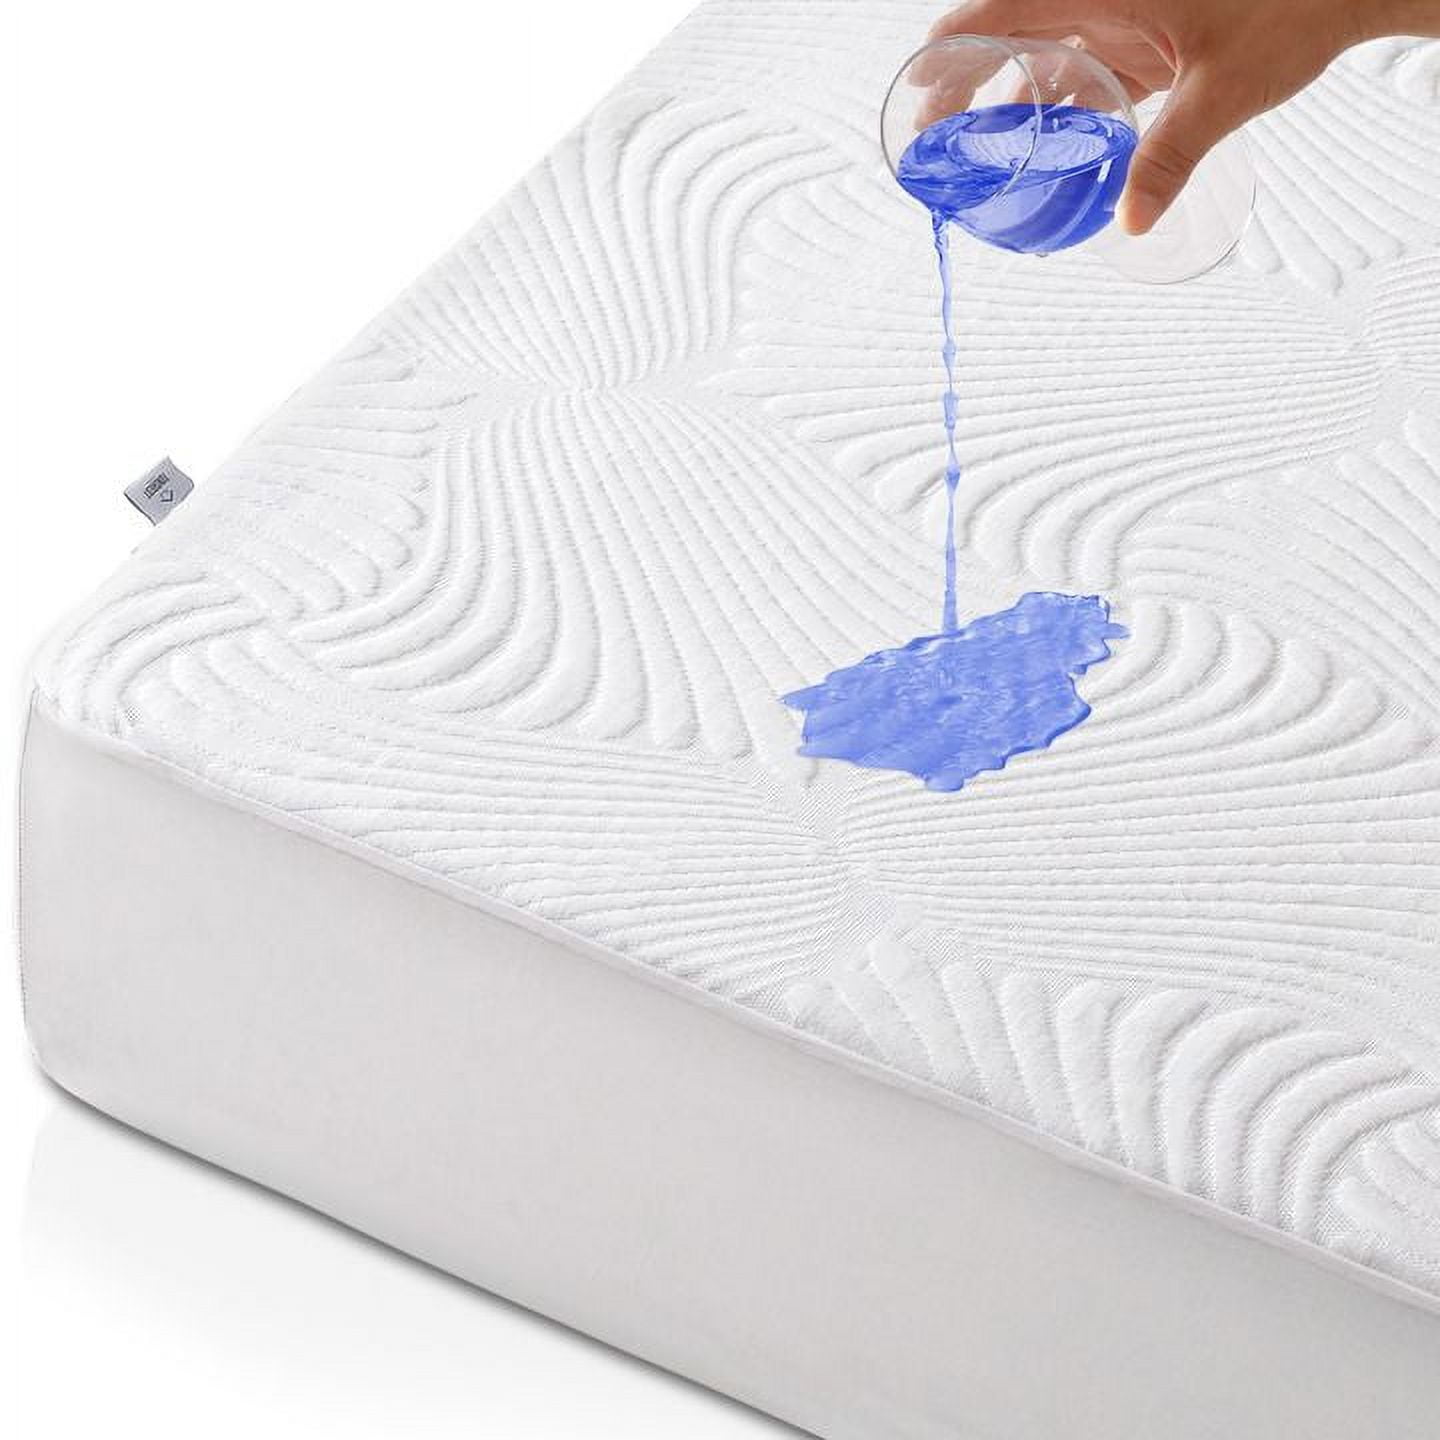 Sufdari Twin Mattress Protector Waterproof,Mattress Cover Twin Size for  Bed,18 Deep Pocket Fitted Sheet Style Mattress Protector with Elastic  Rubber